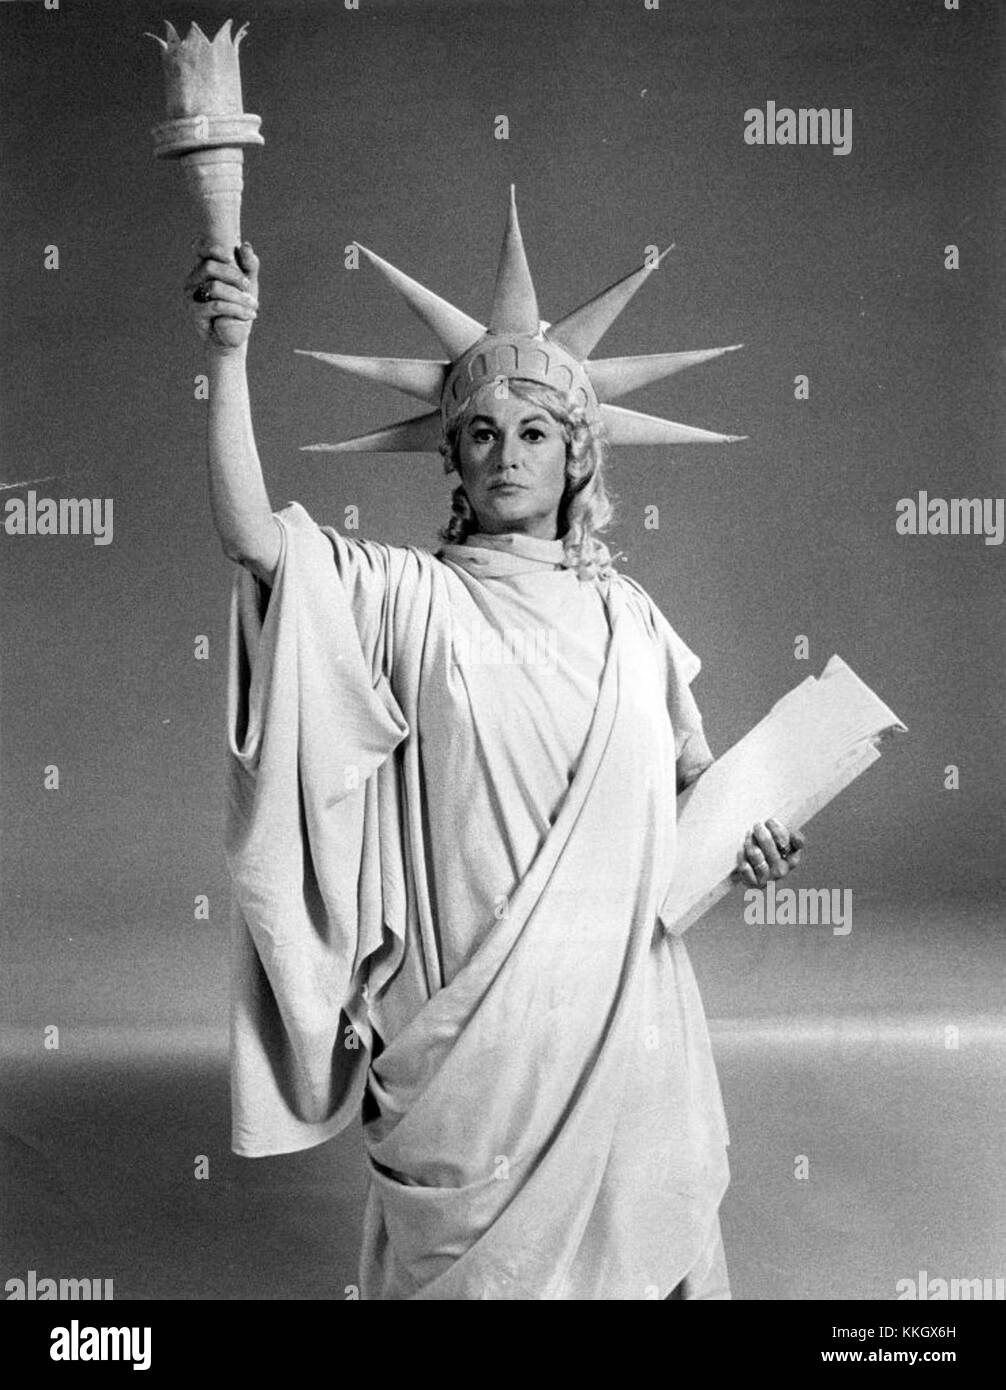 Subjects: Beatrice Arthur Program: "Maude" On Air: Tuesday, Nov. 13, 8:00-8:30 PM, EST Bea Arthur turns into the Statue of Liberty in the hilarious musical production that take over Maude in the show being repeated at 7:30 tonight on Channel 7. Jan Leighton portrays George Washington who will receive a fictional "roasting" on the Dean Martin Show at 10 tonight, Channel 5. If the Maude episode that C.B.S. Is showing at 8 tonight on Channel 7 doesn't win an Emmy as the funniest comedy episode of the season, then there isn't any justice. Maude Bea Arthur 1973 Stock Photo